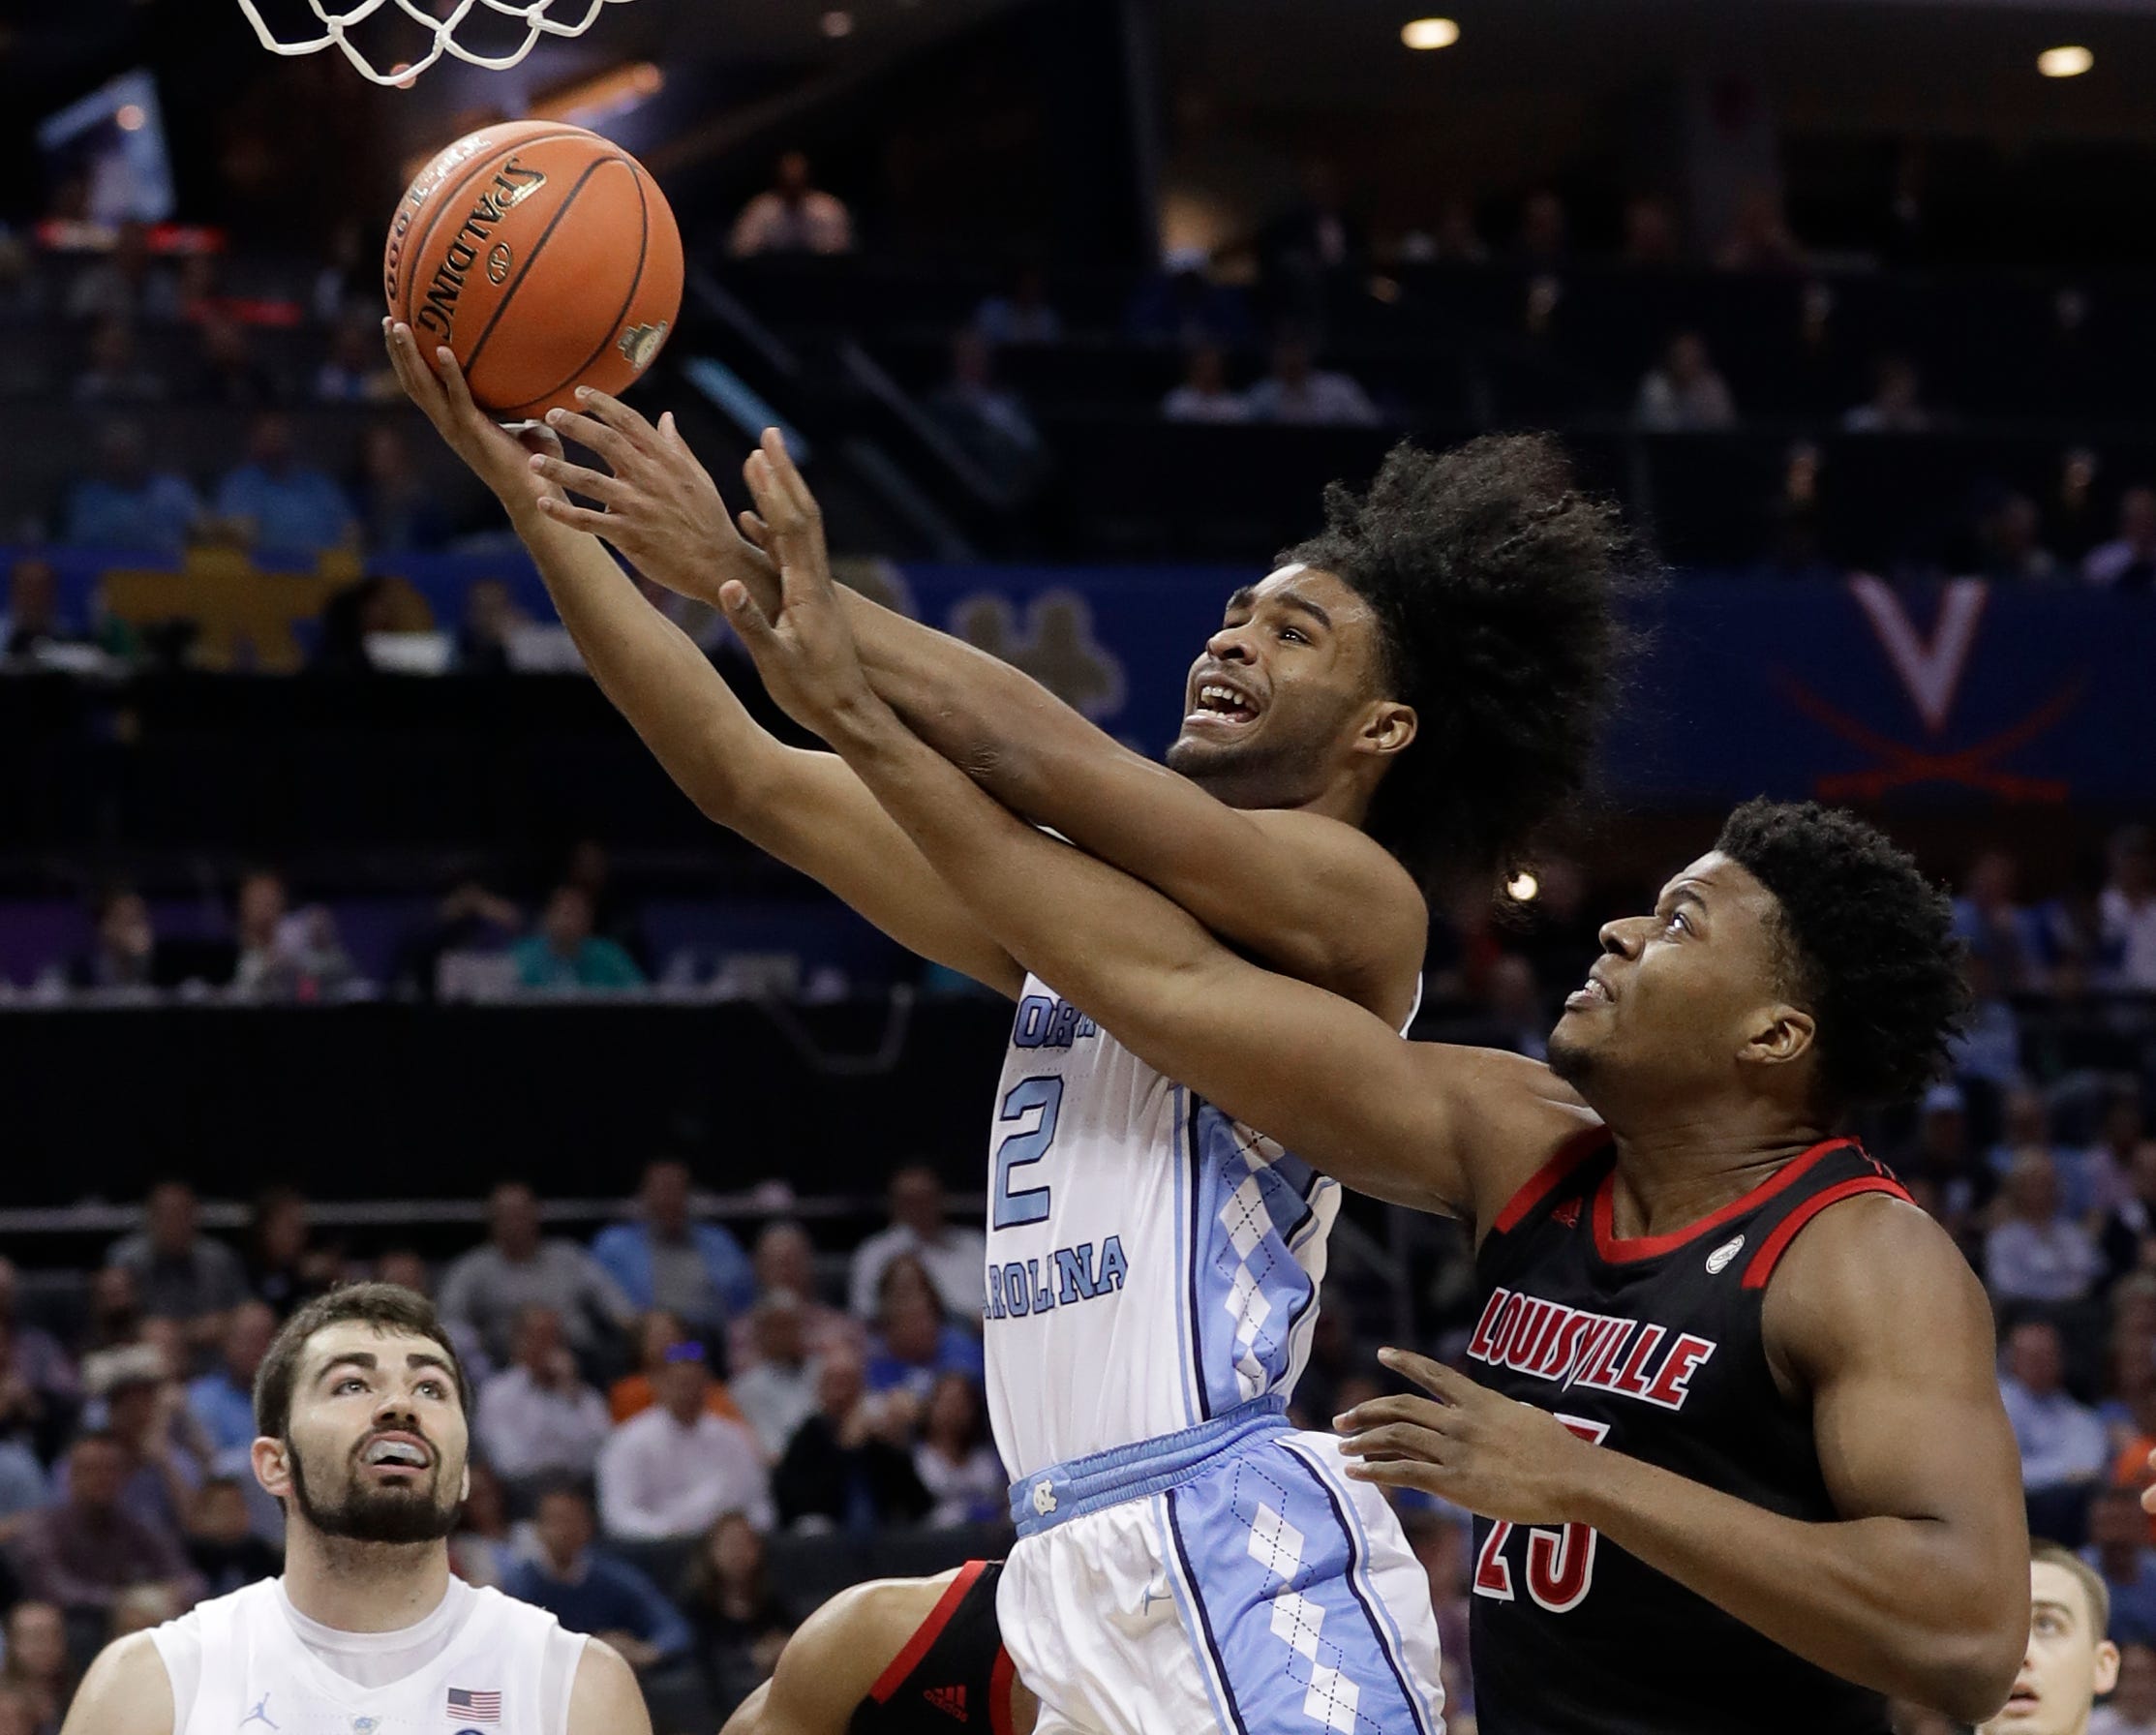 6. Phoenix Suns: Coby White, PG, North Carolina. The Suns had their hearts set on Garland falling to them, but they’ll have a good fallback option in White, who was one of the most electric point guards in college last season. They’re missing a good point guard and if both Garland and White are gone, they’ll have to rethink the pick.